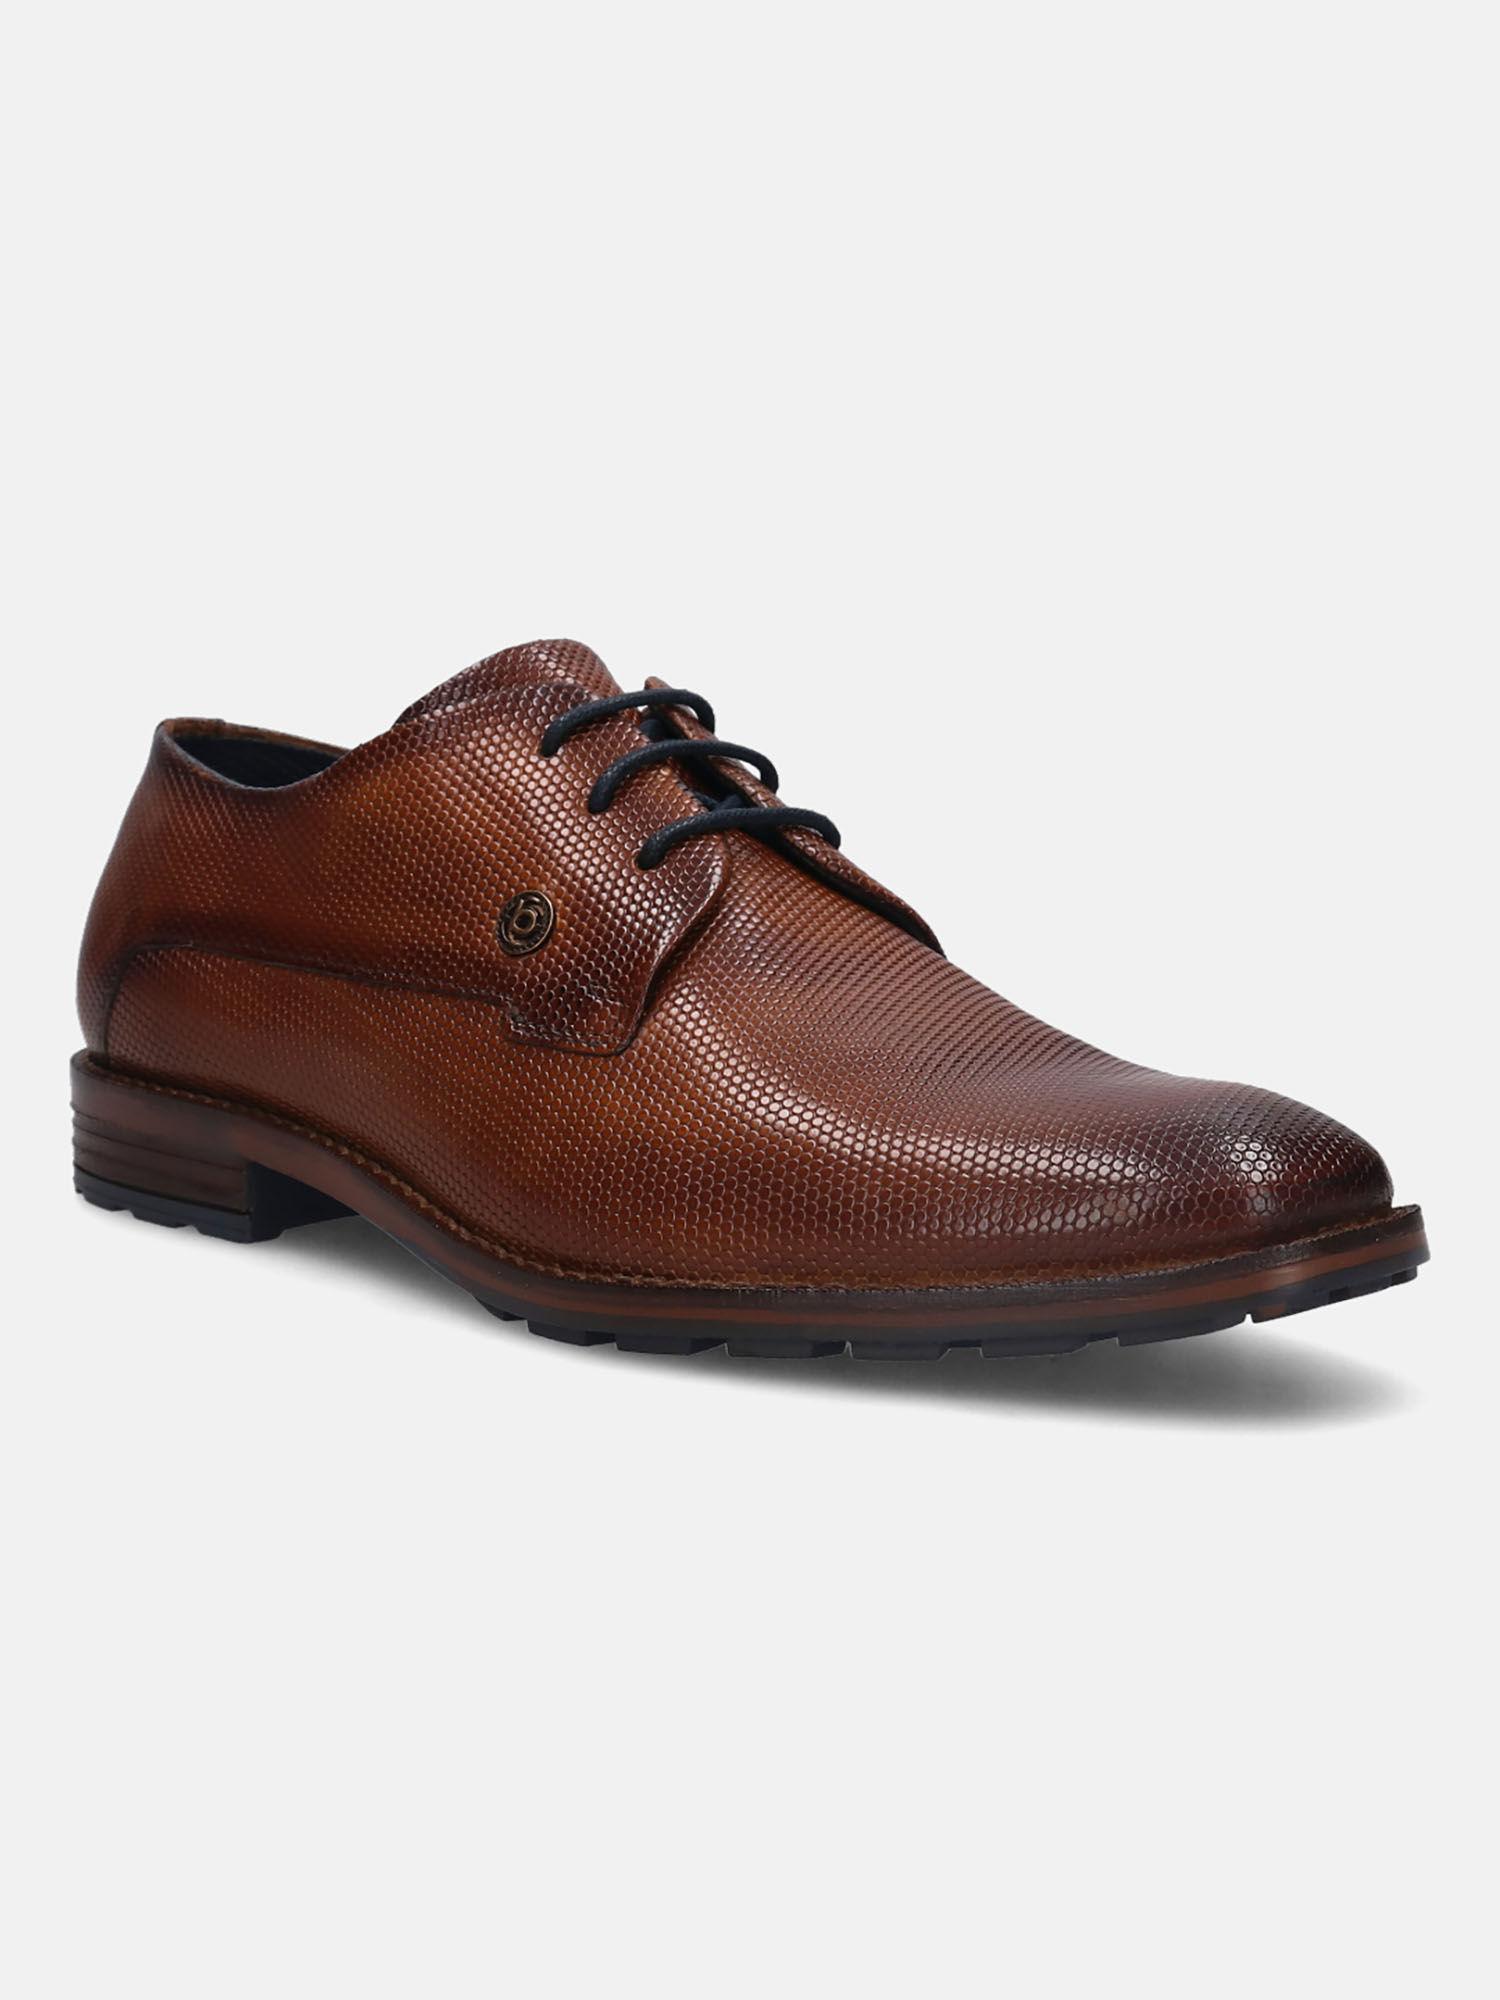 mano cognac leather formal derby shoes